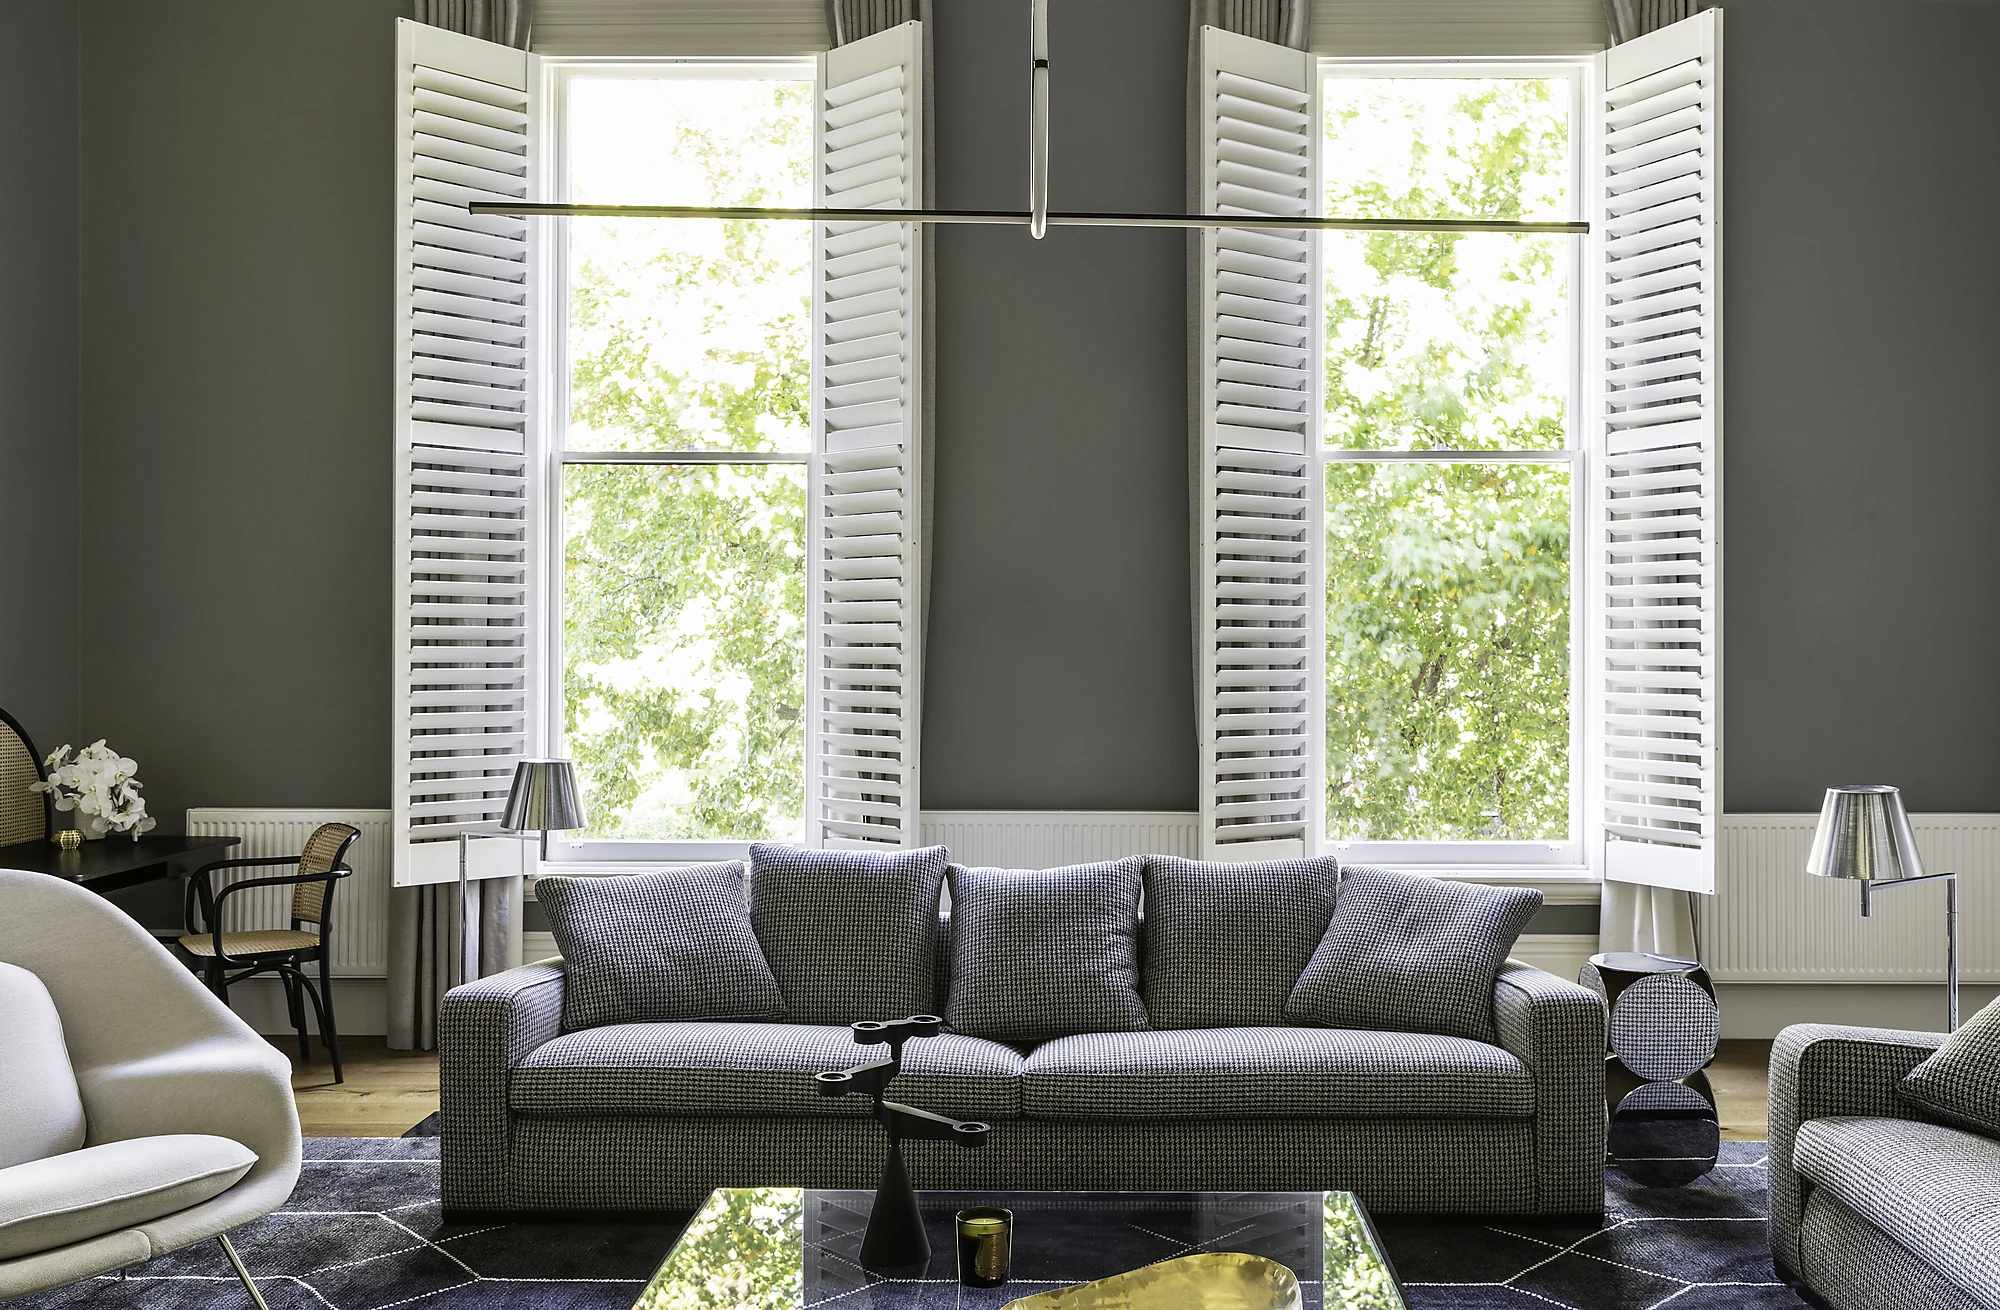 Grey living room with white plantation shutters.